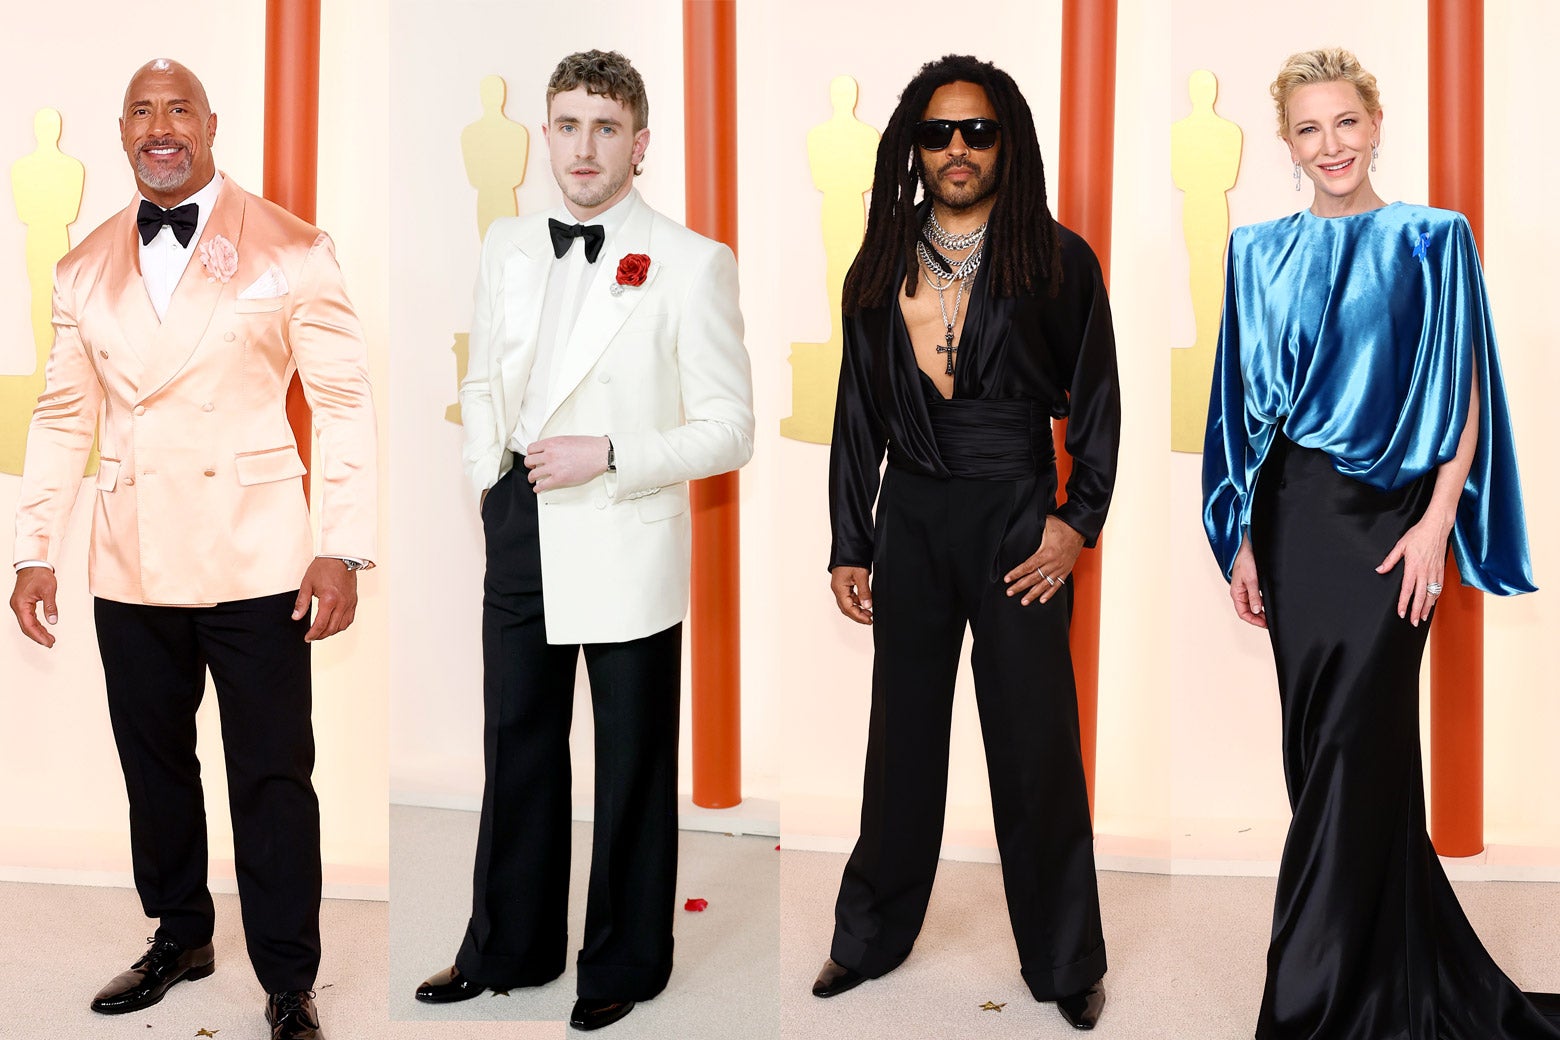 The Rock, Paul Mescal, Lenny Kravitz and Cate Blanchett at the 2023 Oscars.
